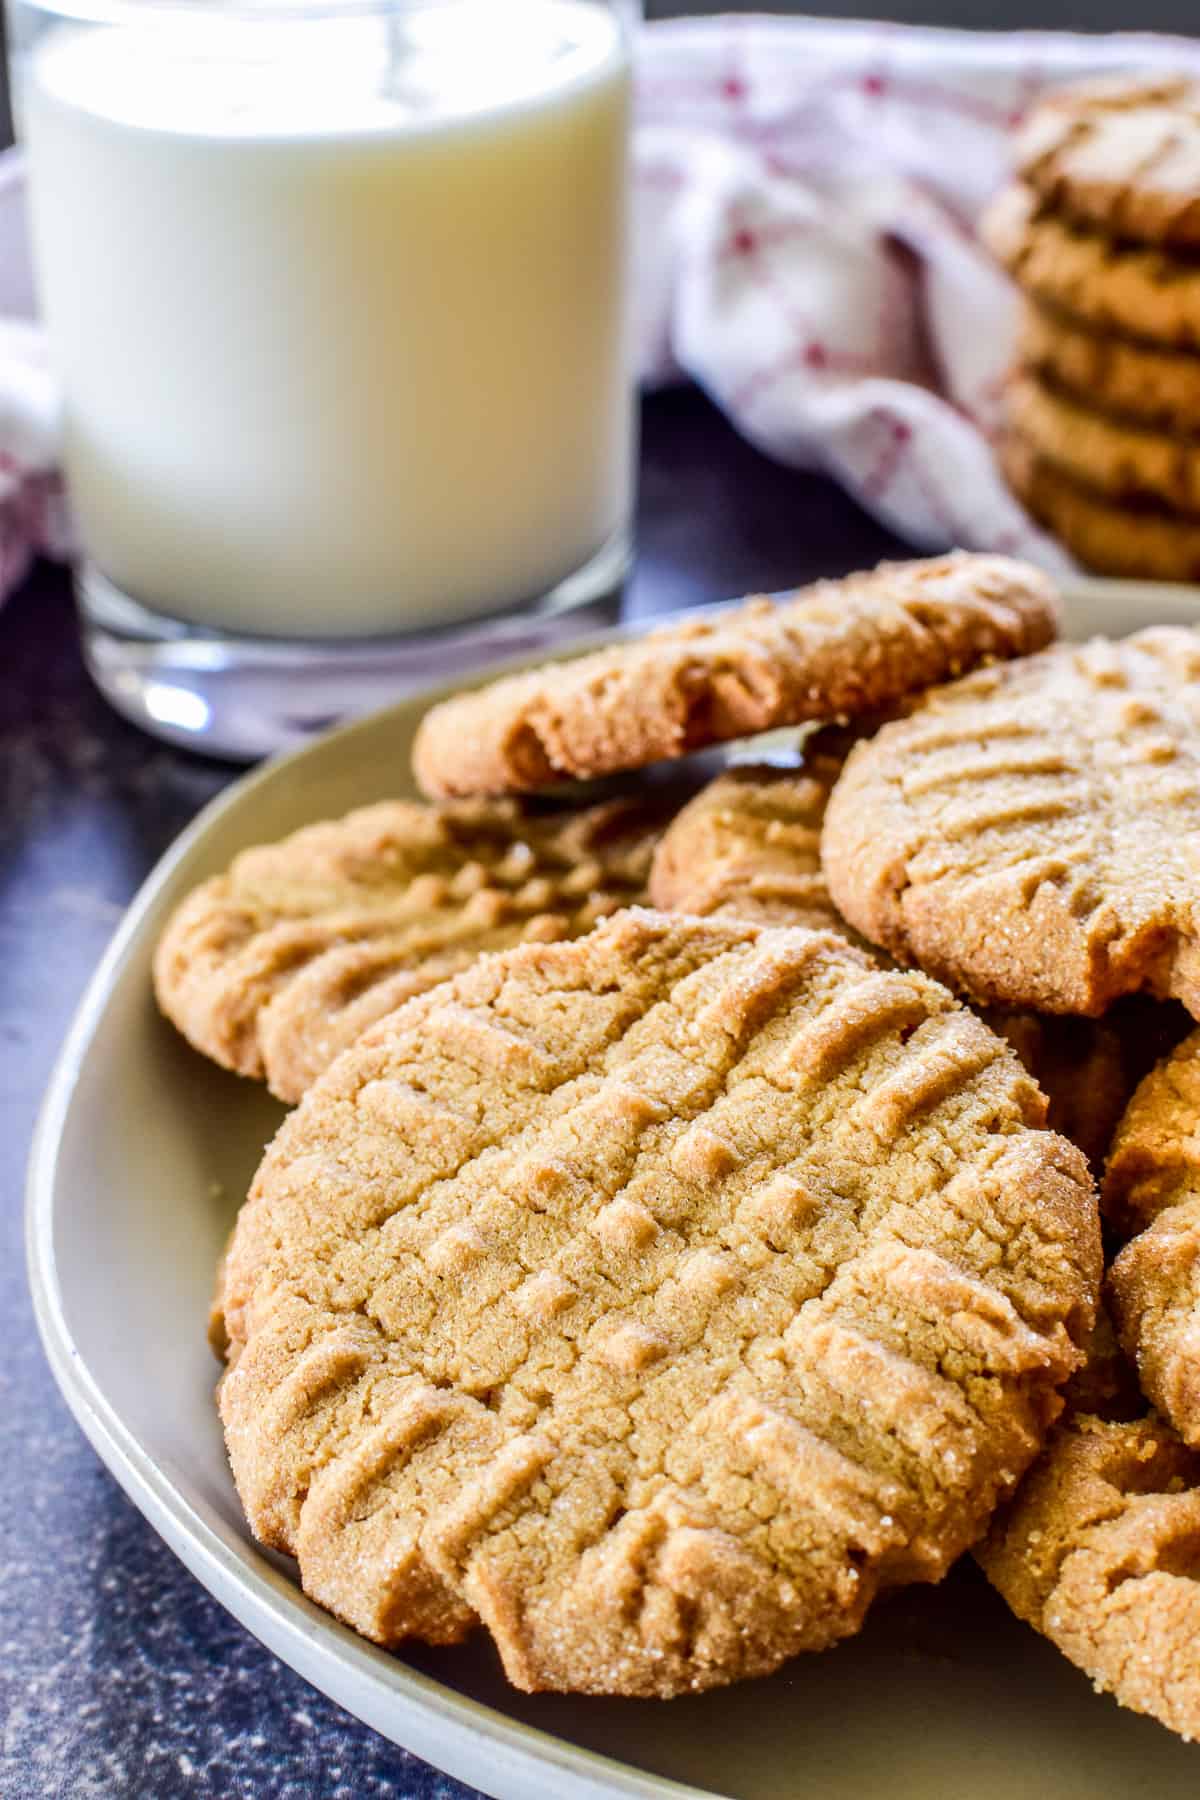 Side view of peanut butter cookies on a plate with a glass of milk